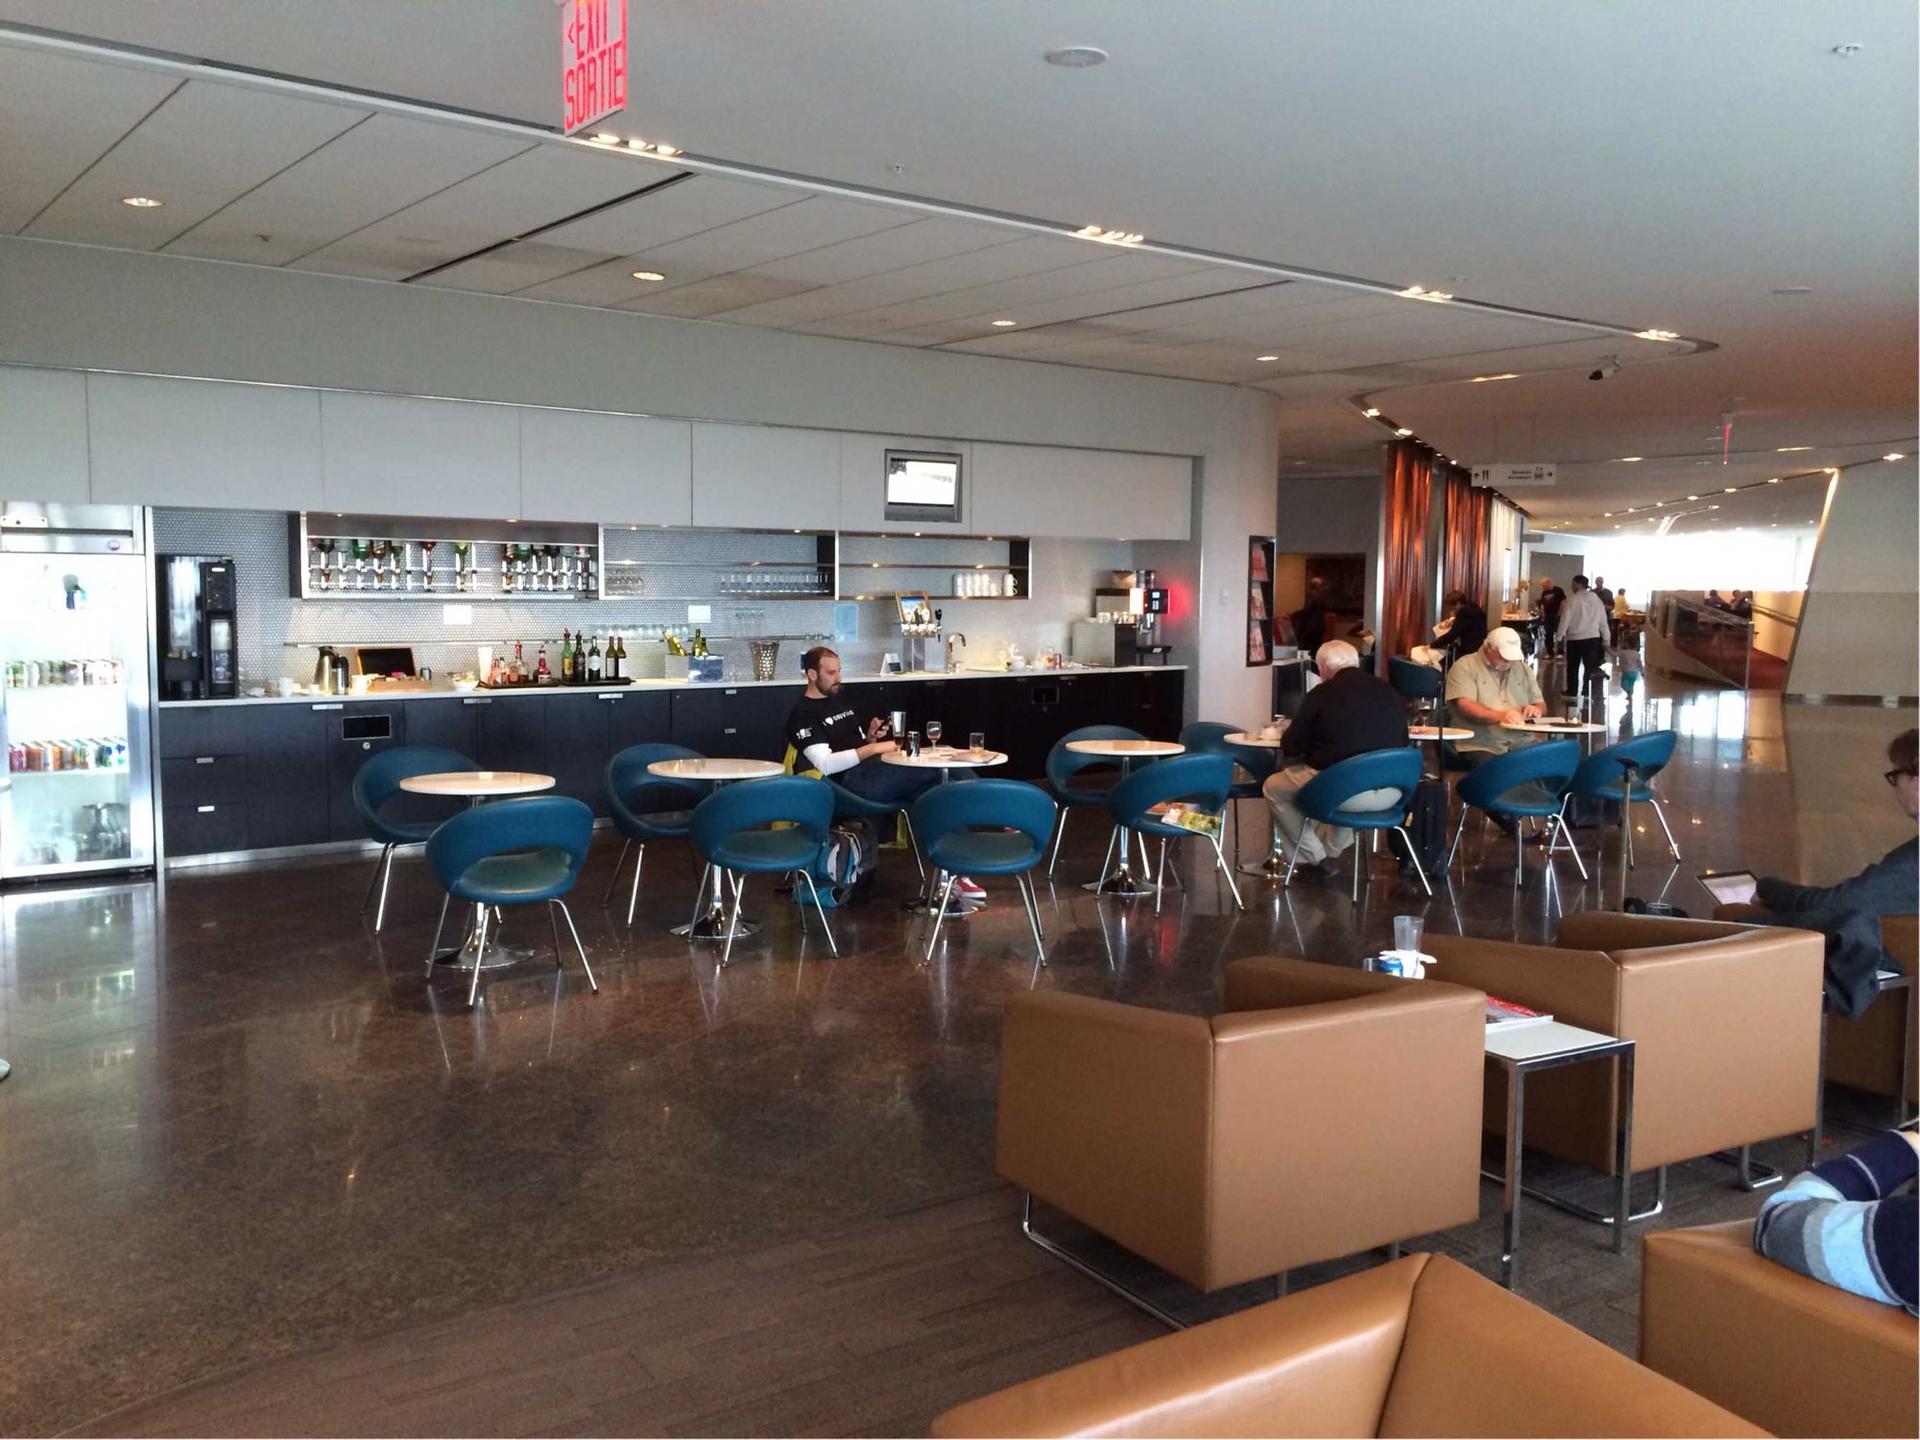 Air Canada Maple Leaf Lounge image 29 of 30